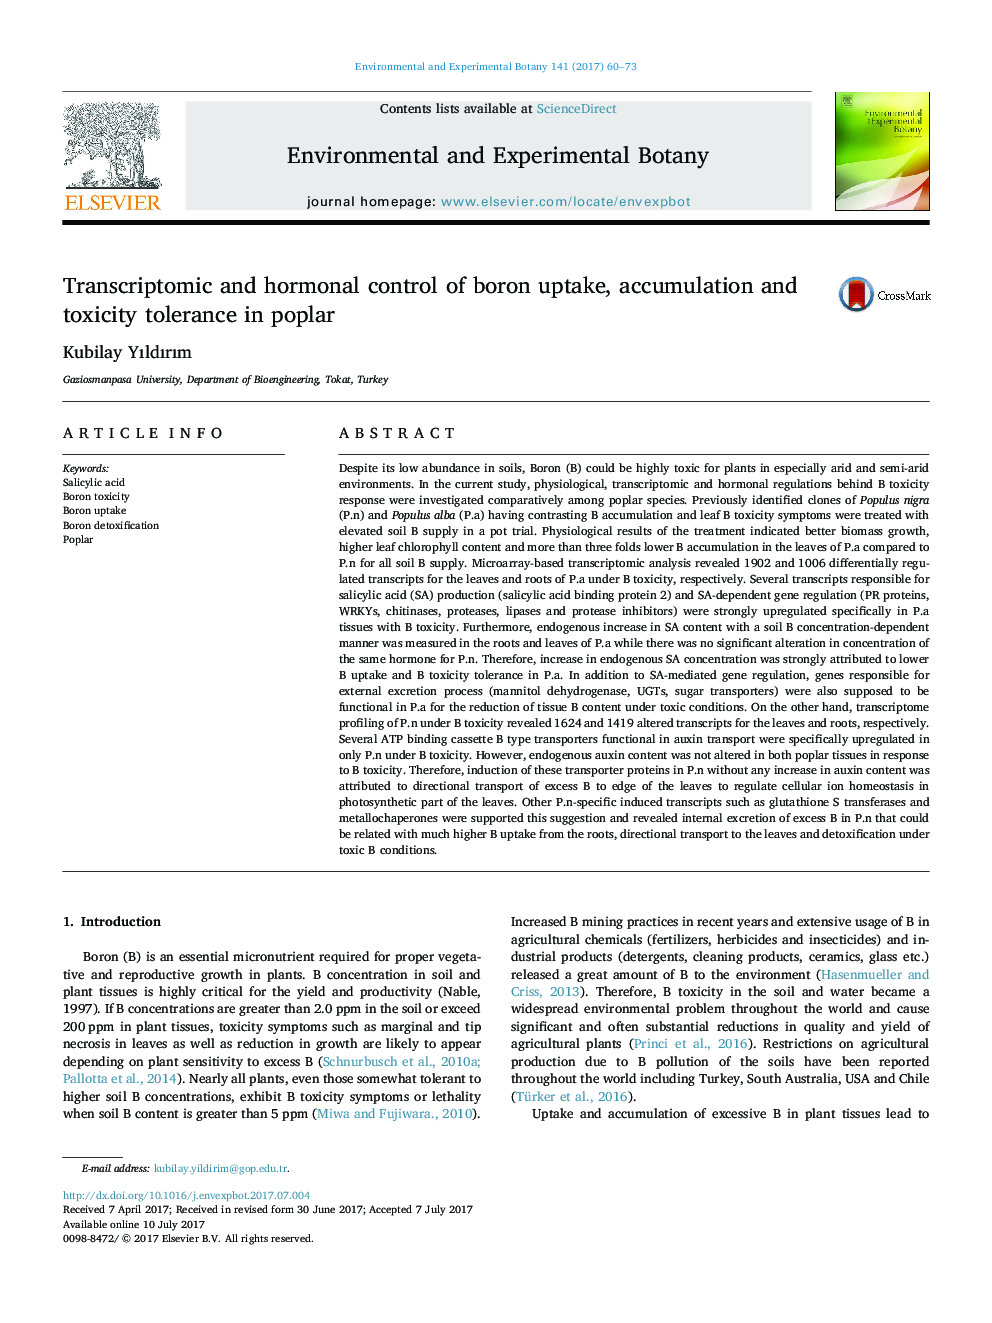 Transcriptomic and hormonal control of boron uptake, accumulation and toxicity tolerance in poplar